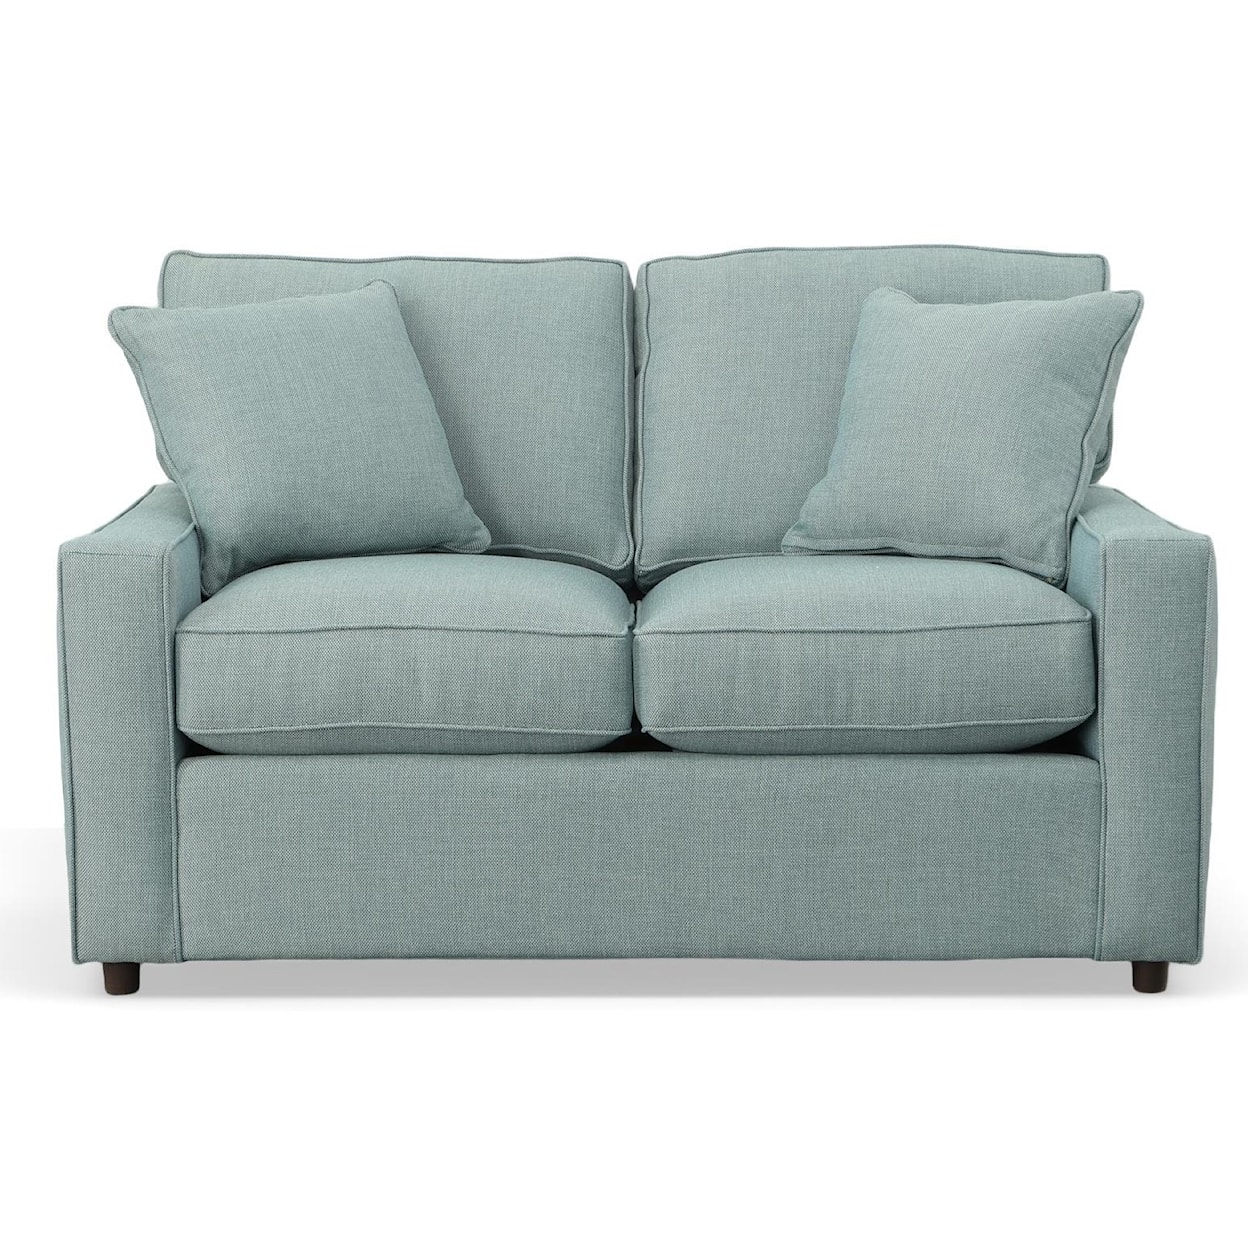 Rowe Monaco Transitional Loveseat with Track Arms